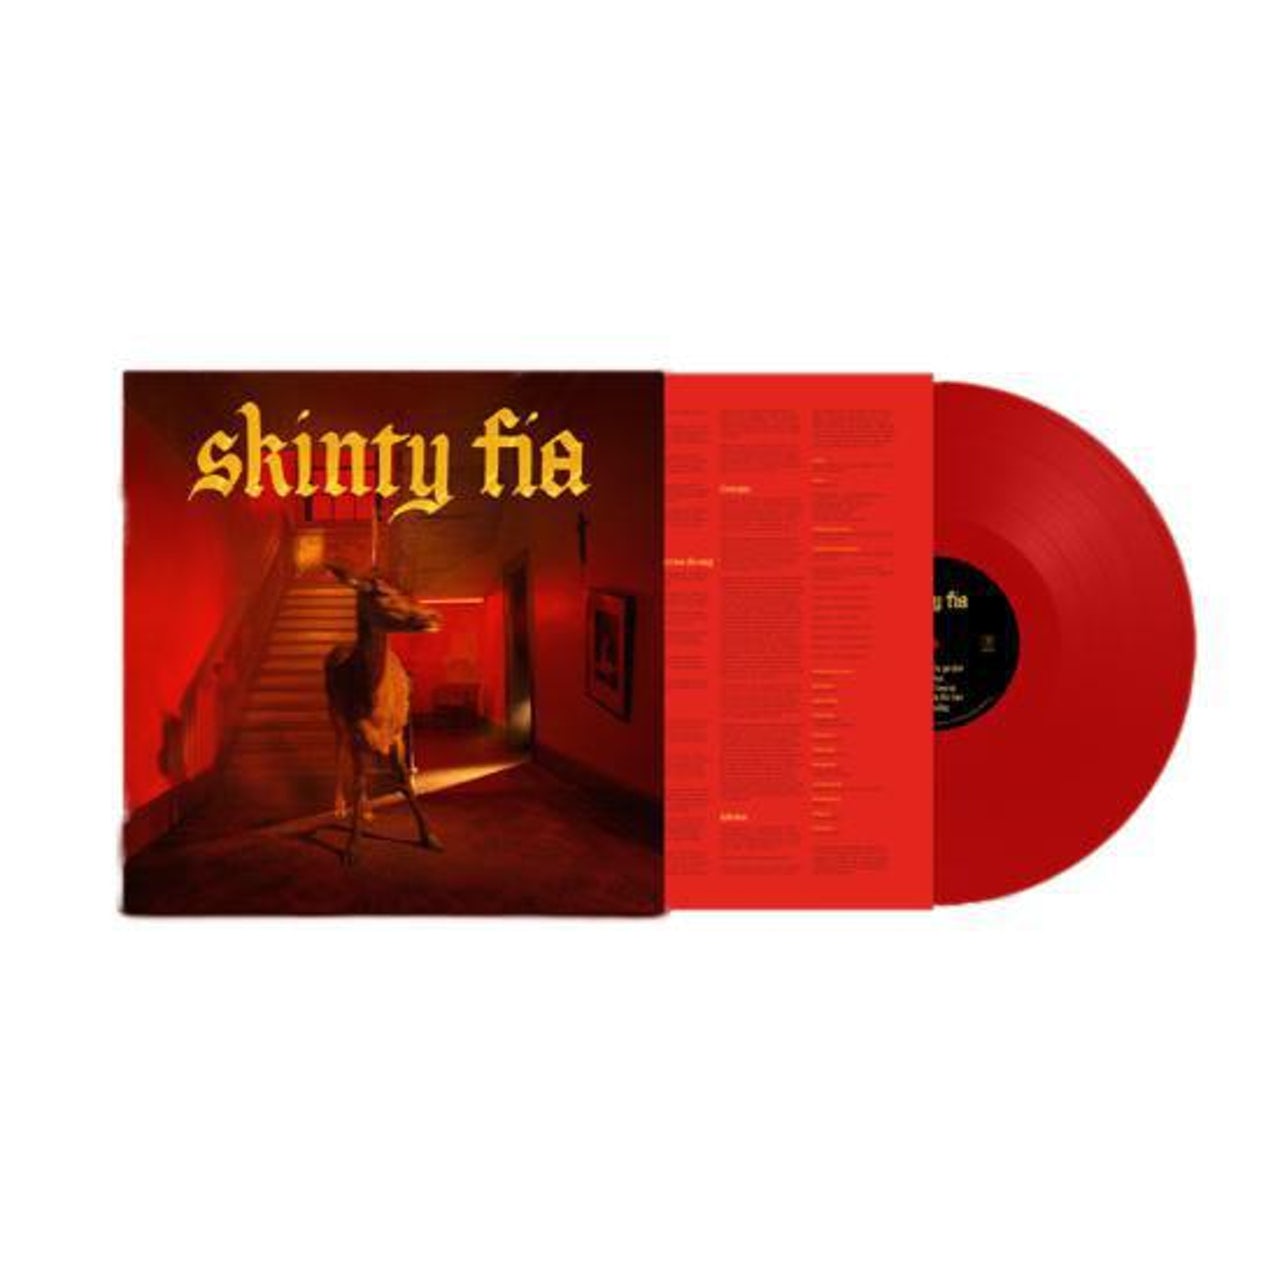 Fontaines D.C. - Skinty Fia (Red Vinyl)